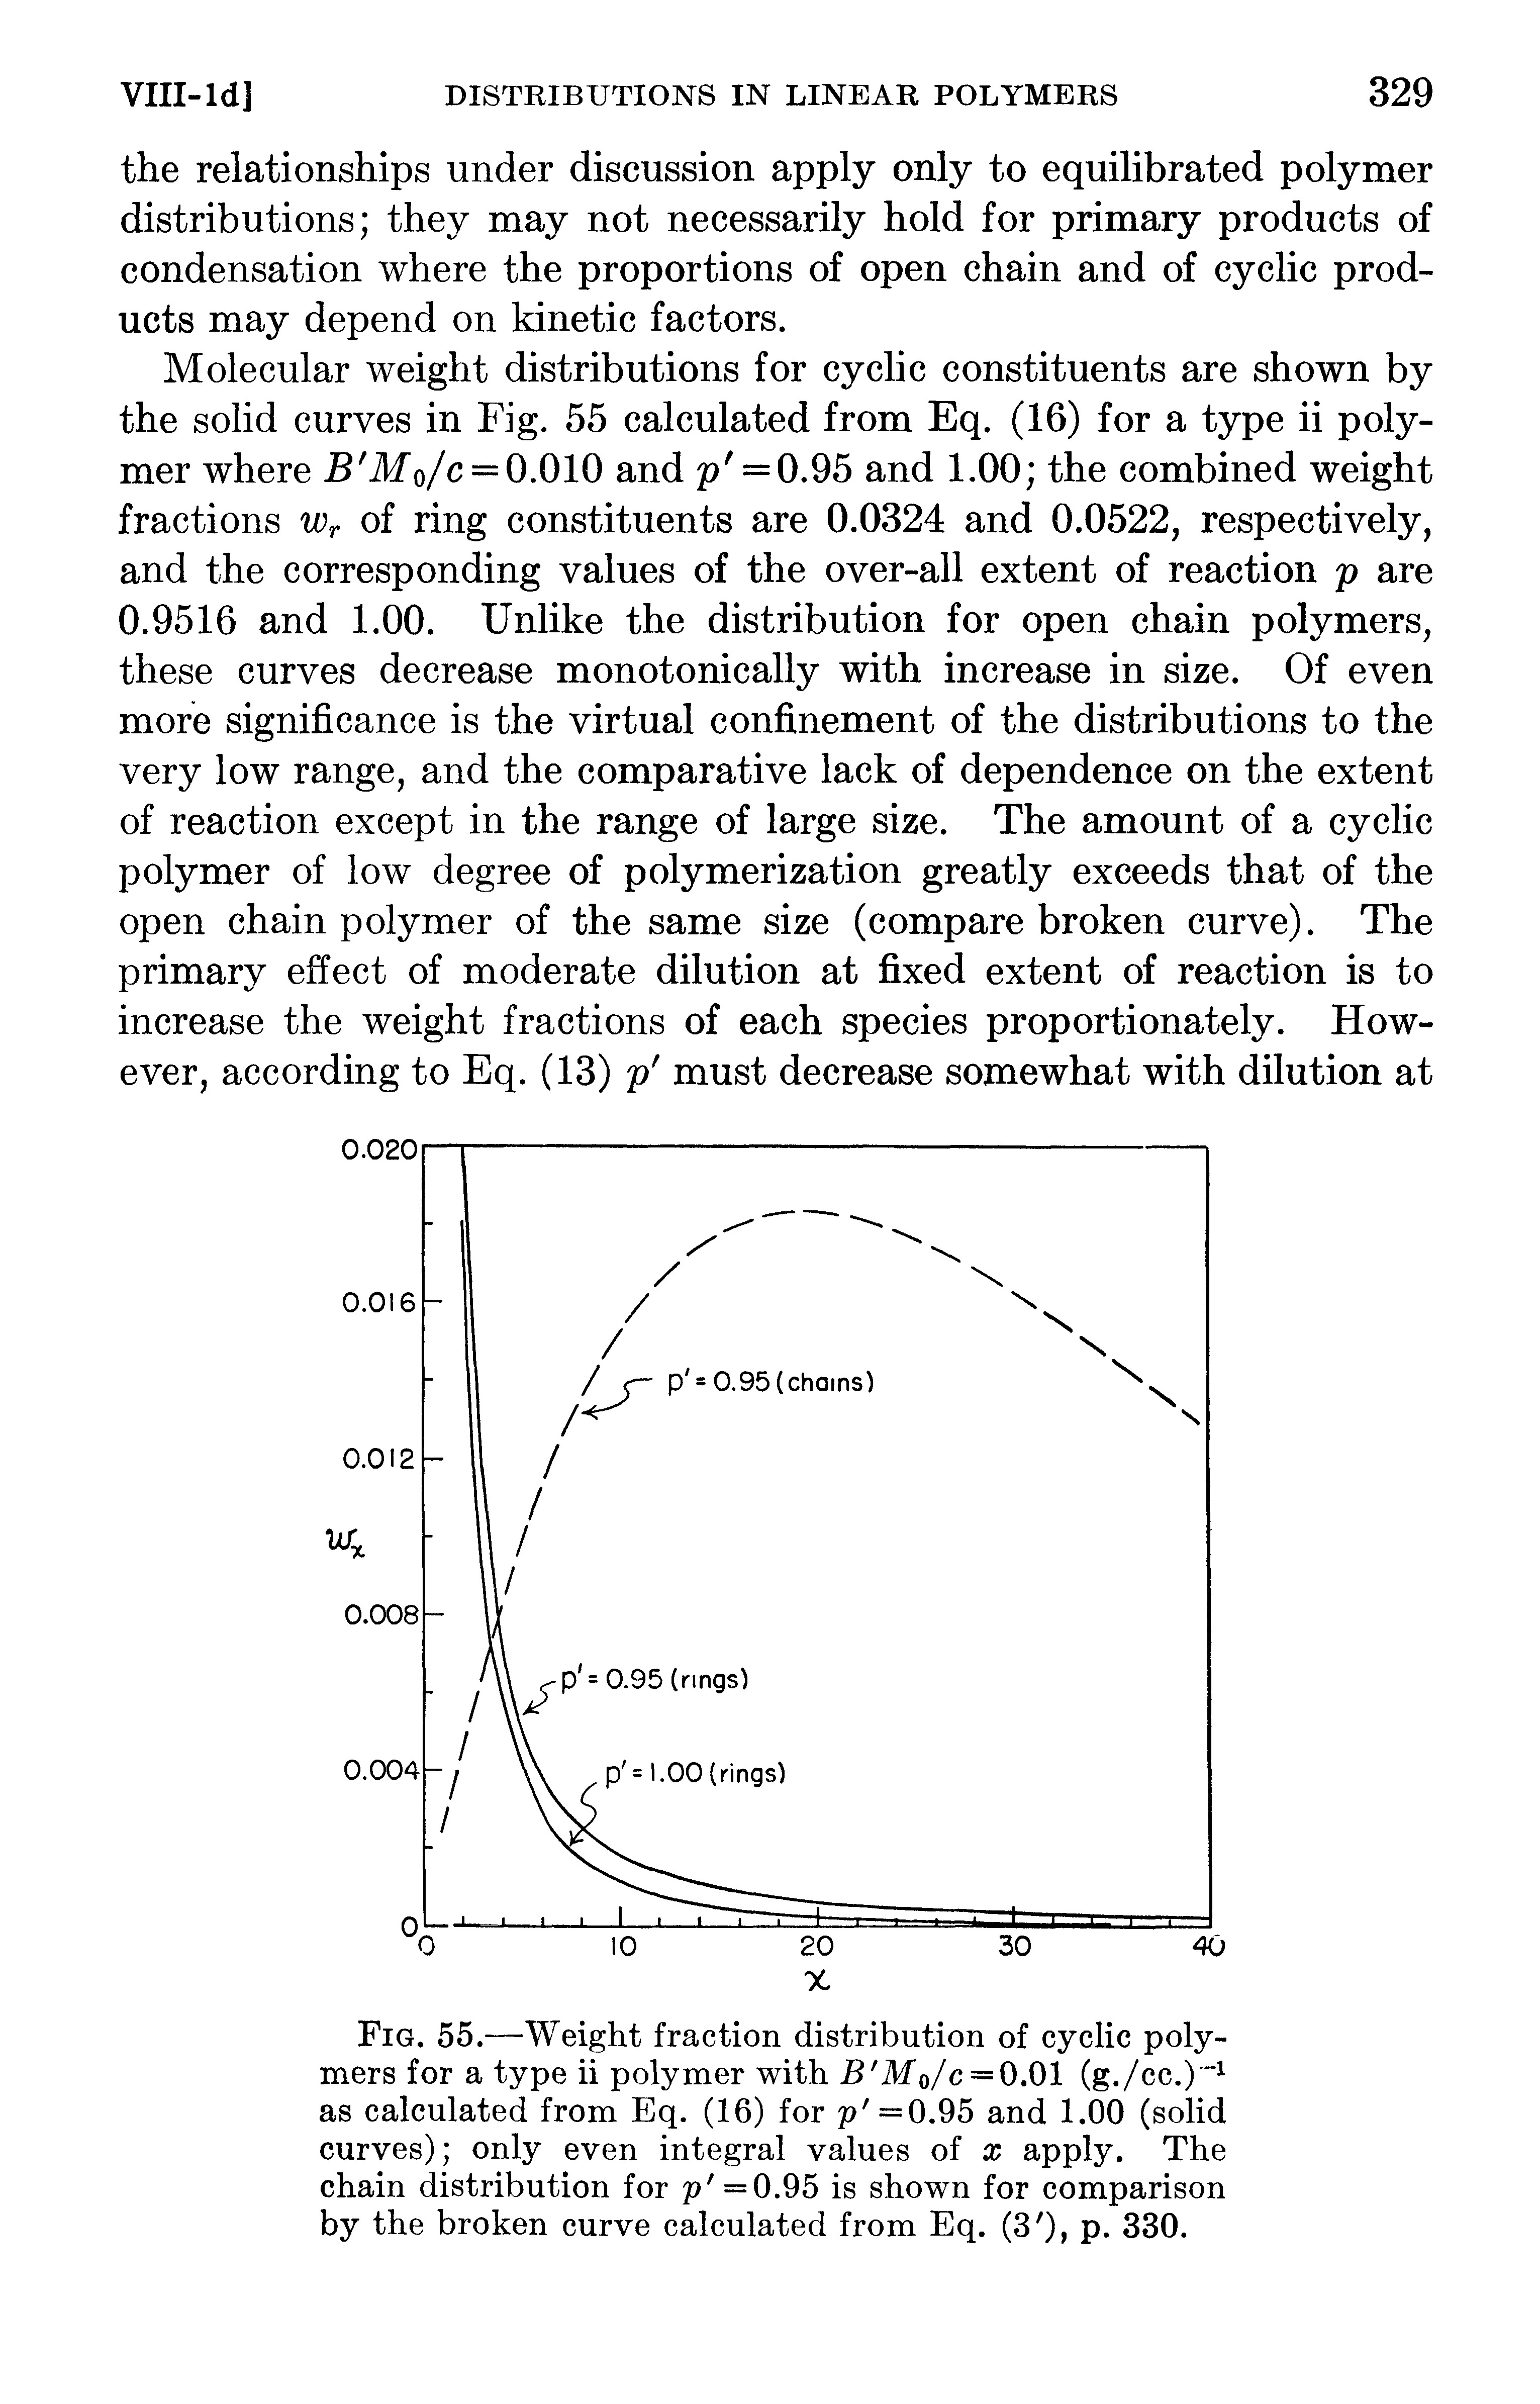 Fig. 55.—Weight fraction distribution of cyclic polymers for a type ii polymer with B Mo/c = 0.01 (g./cc.) as calculated from Eq. (16) for p =0.95 and 1.00 (solid curves) only even integral values of x apply. The chain distribution for p =0.95 is shown for comparison by the broken curve calculated from Eq. (3 ), p. 330.